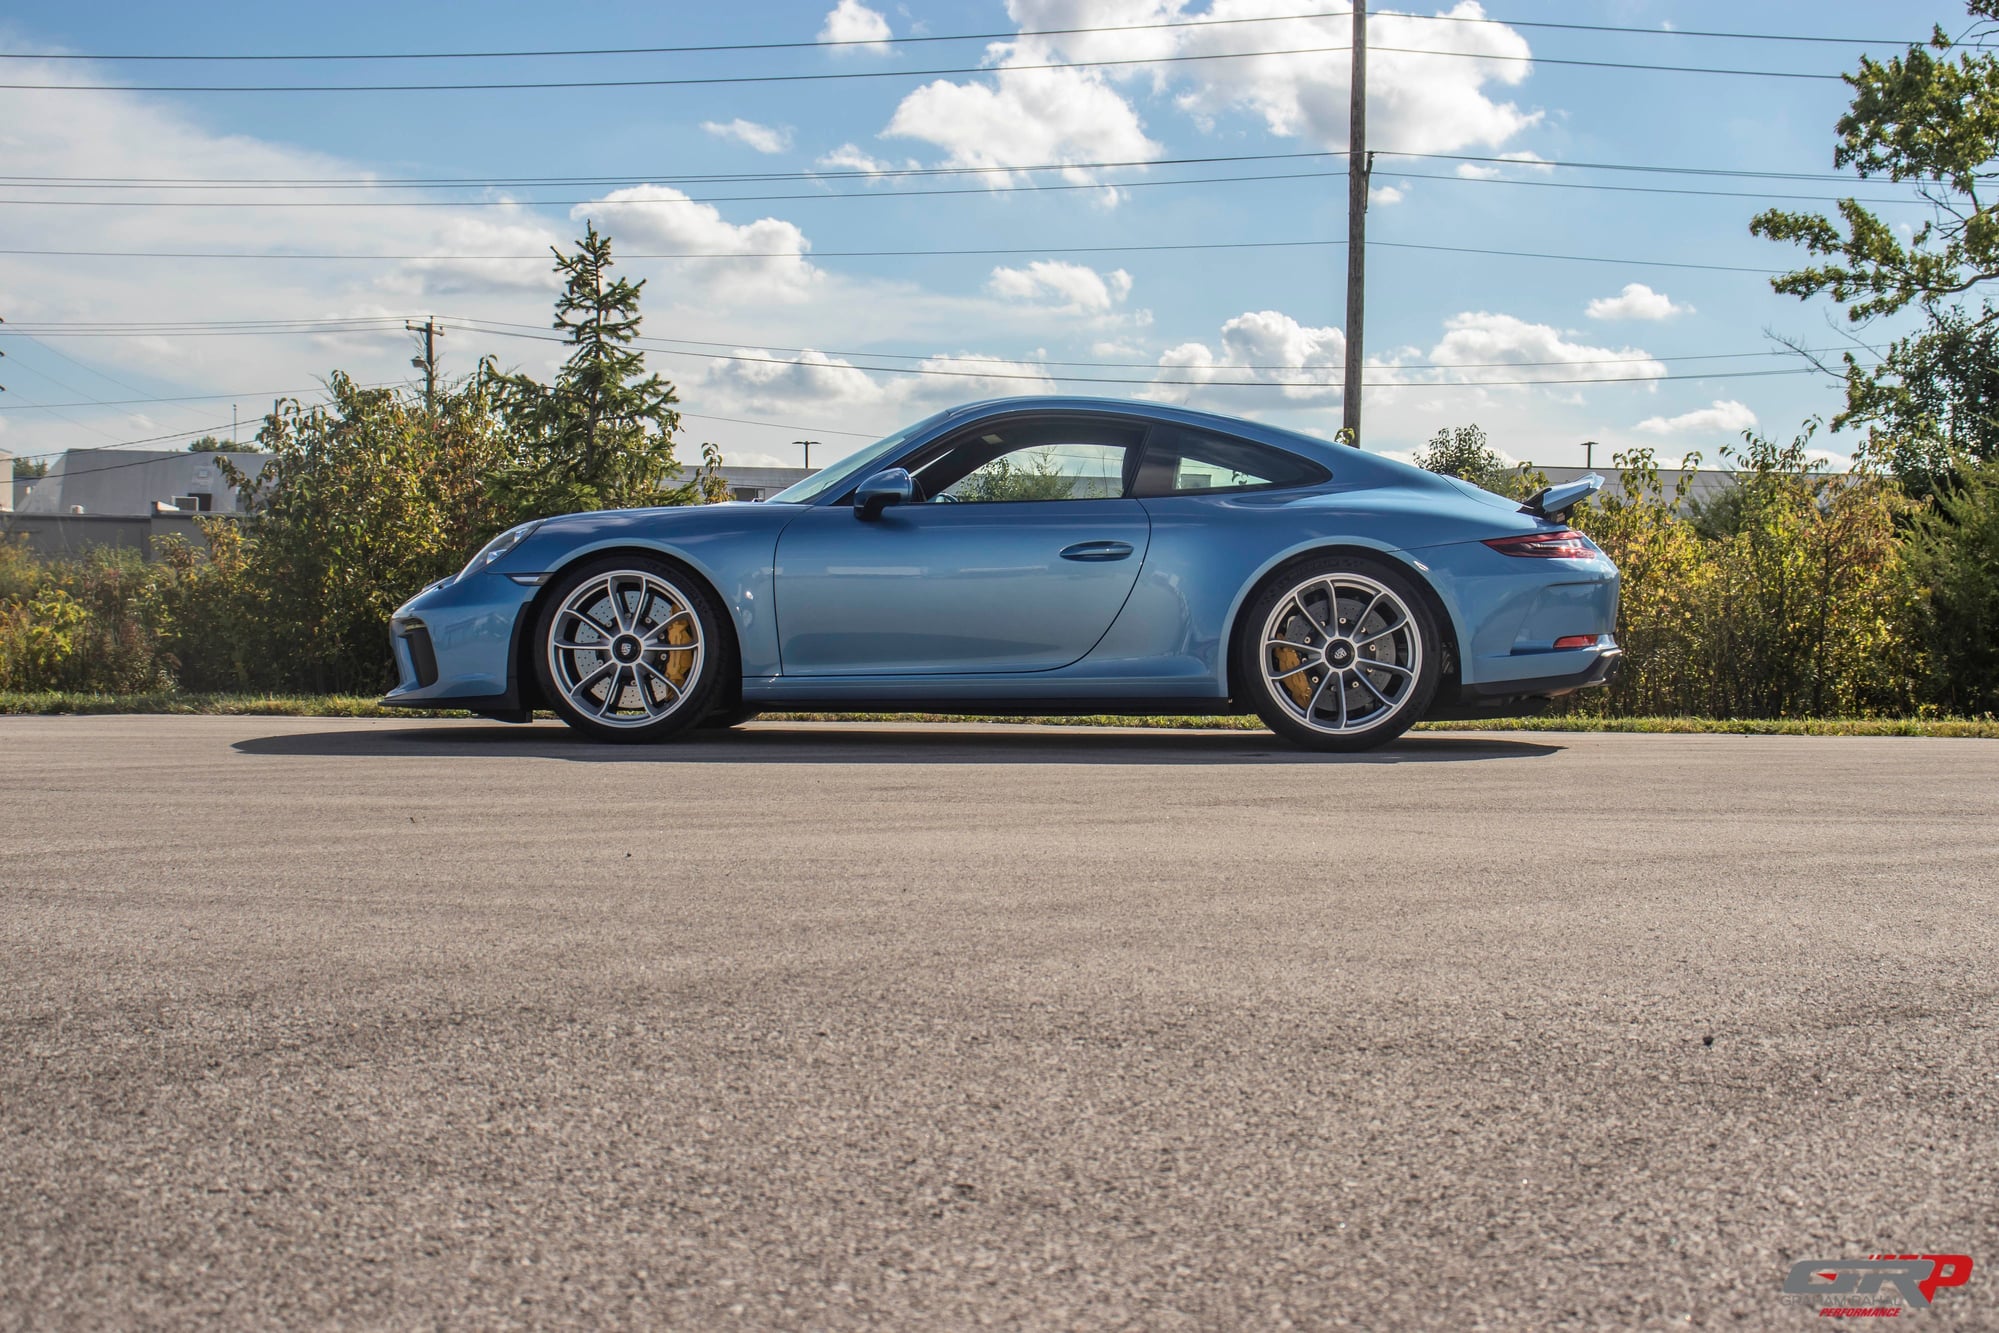 2018 Porsche 911 - 2018 Porsche GT3 Touring - PTS Gemini Blue - Used - VIN WP0AC2A97JS177204 - 5,661 Miles - 6 cyl - 2WD - Manual - Coupe - Blue - Brownsburg, IN 46112, United States